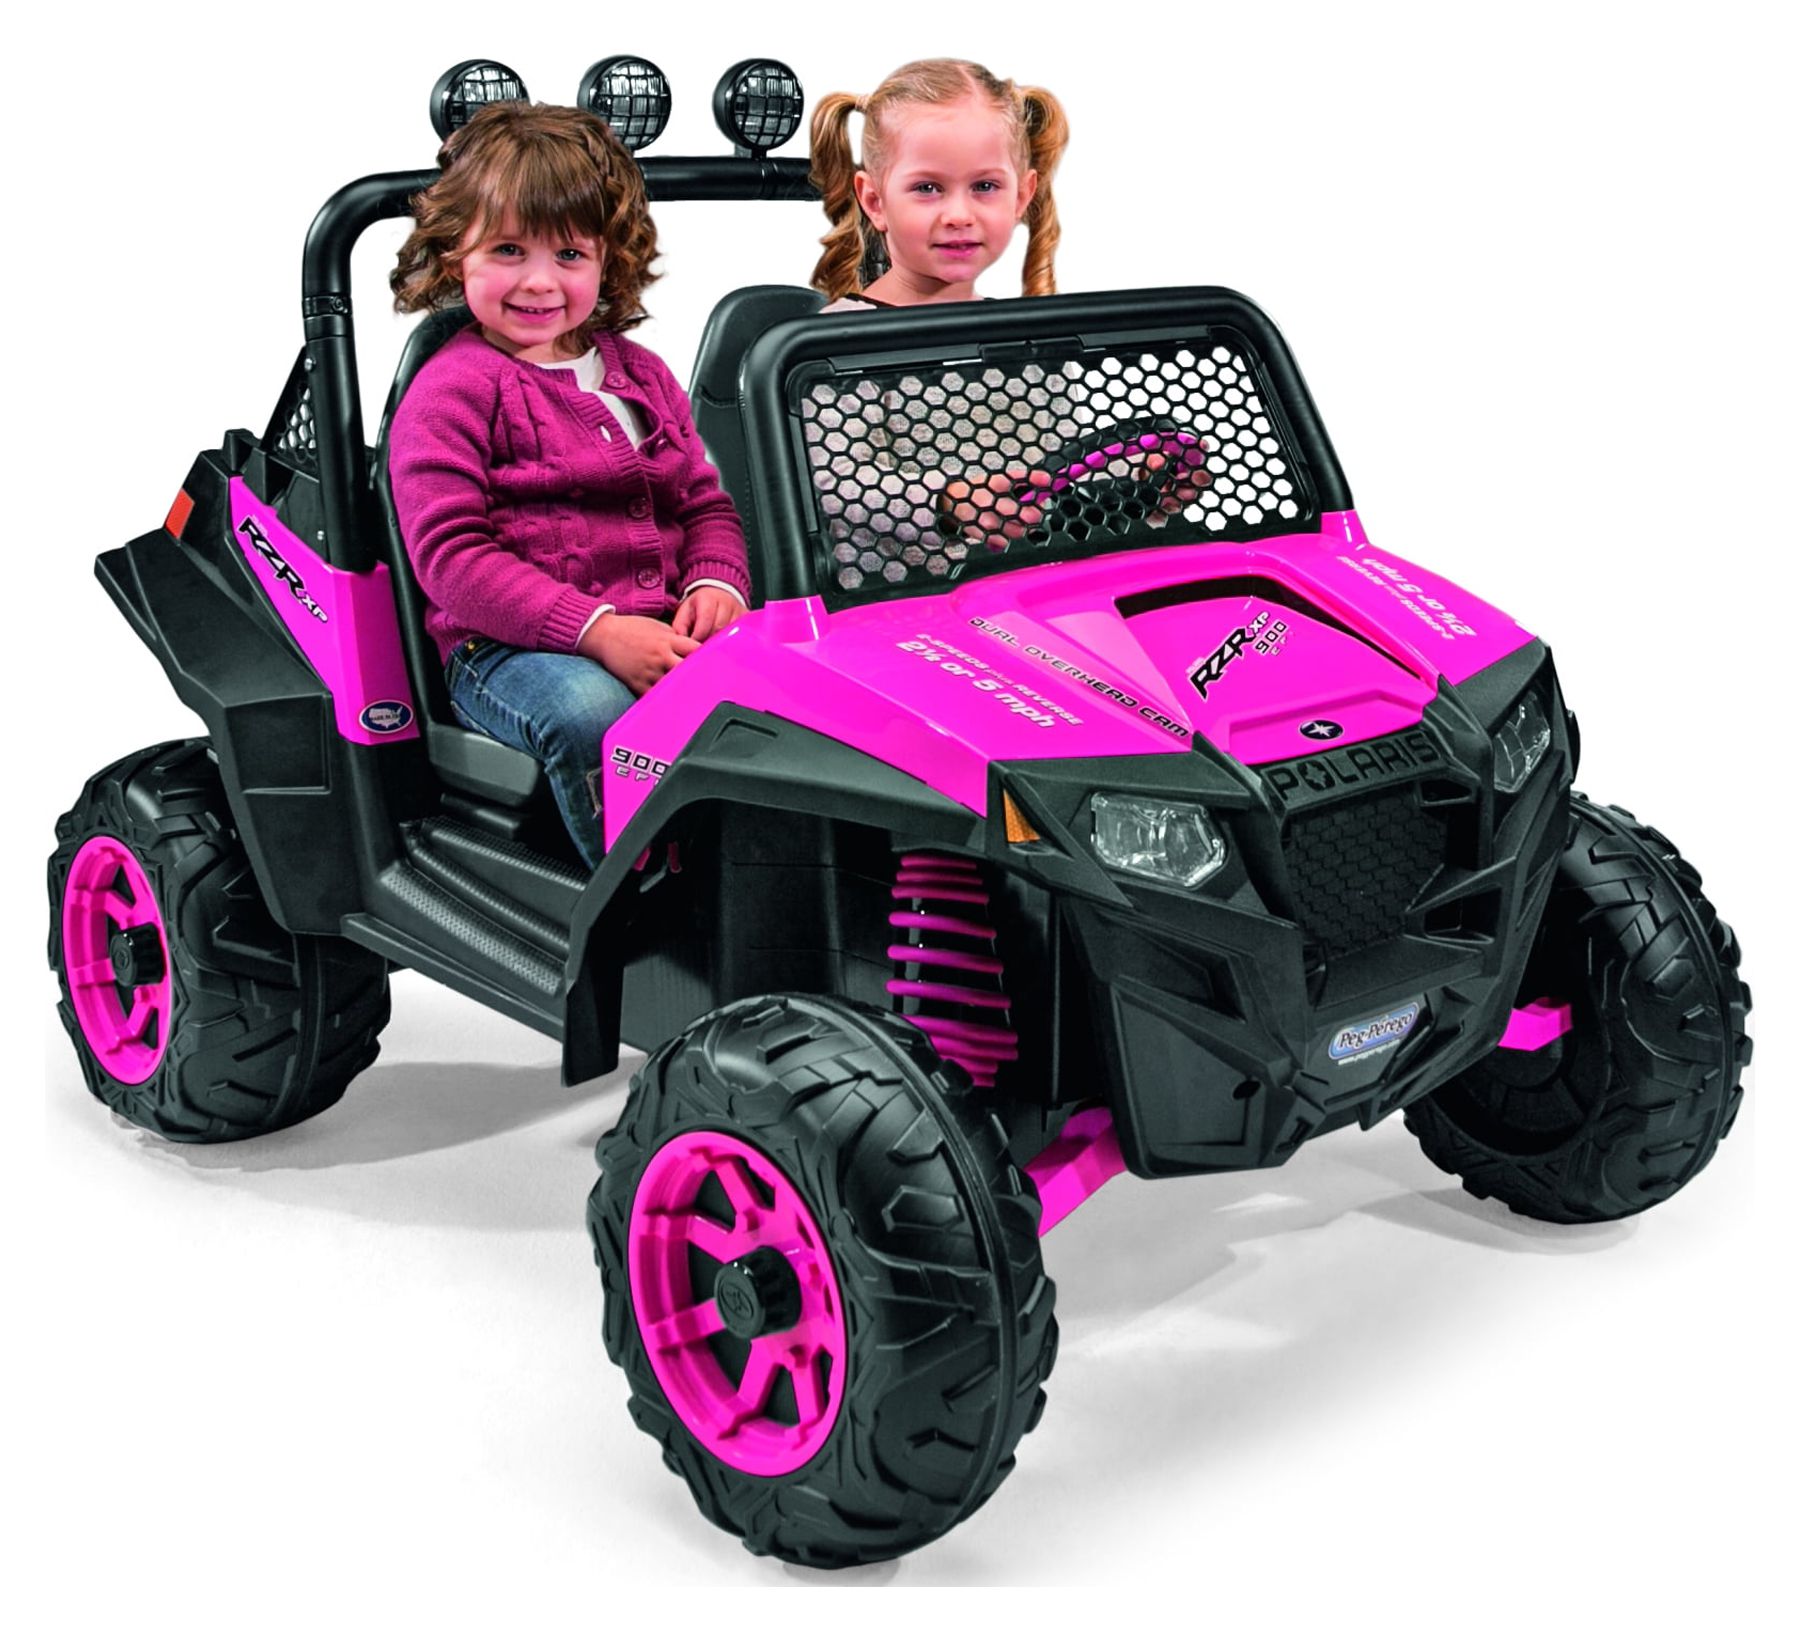 Peg Perego Polaris Ranger RZR 900 12-Volts Battery-Powered Ride-on, Pink - image 1 of 9